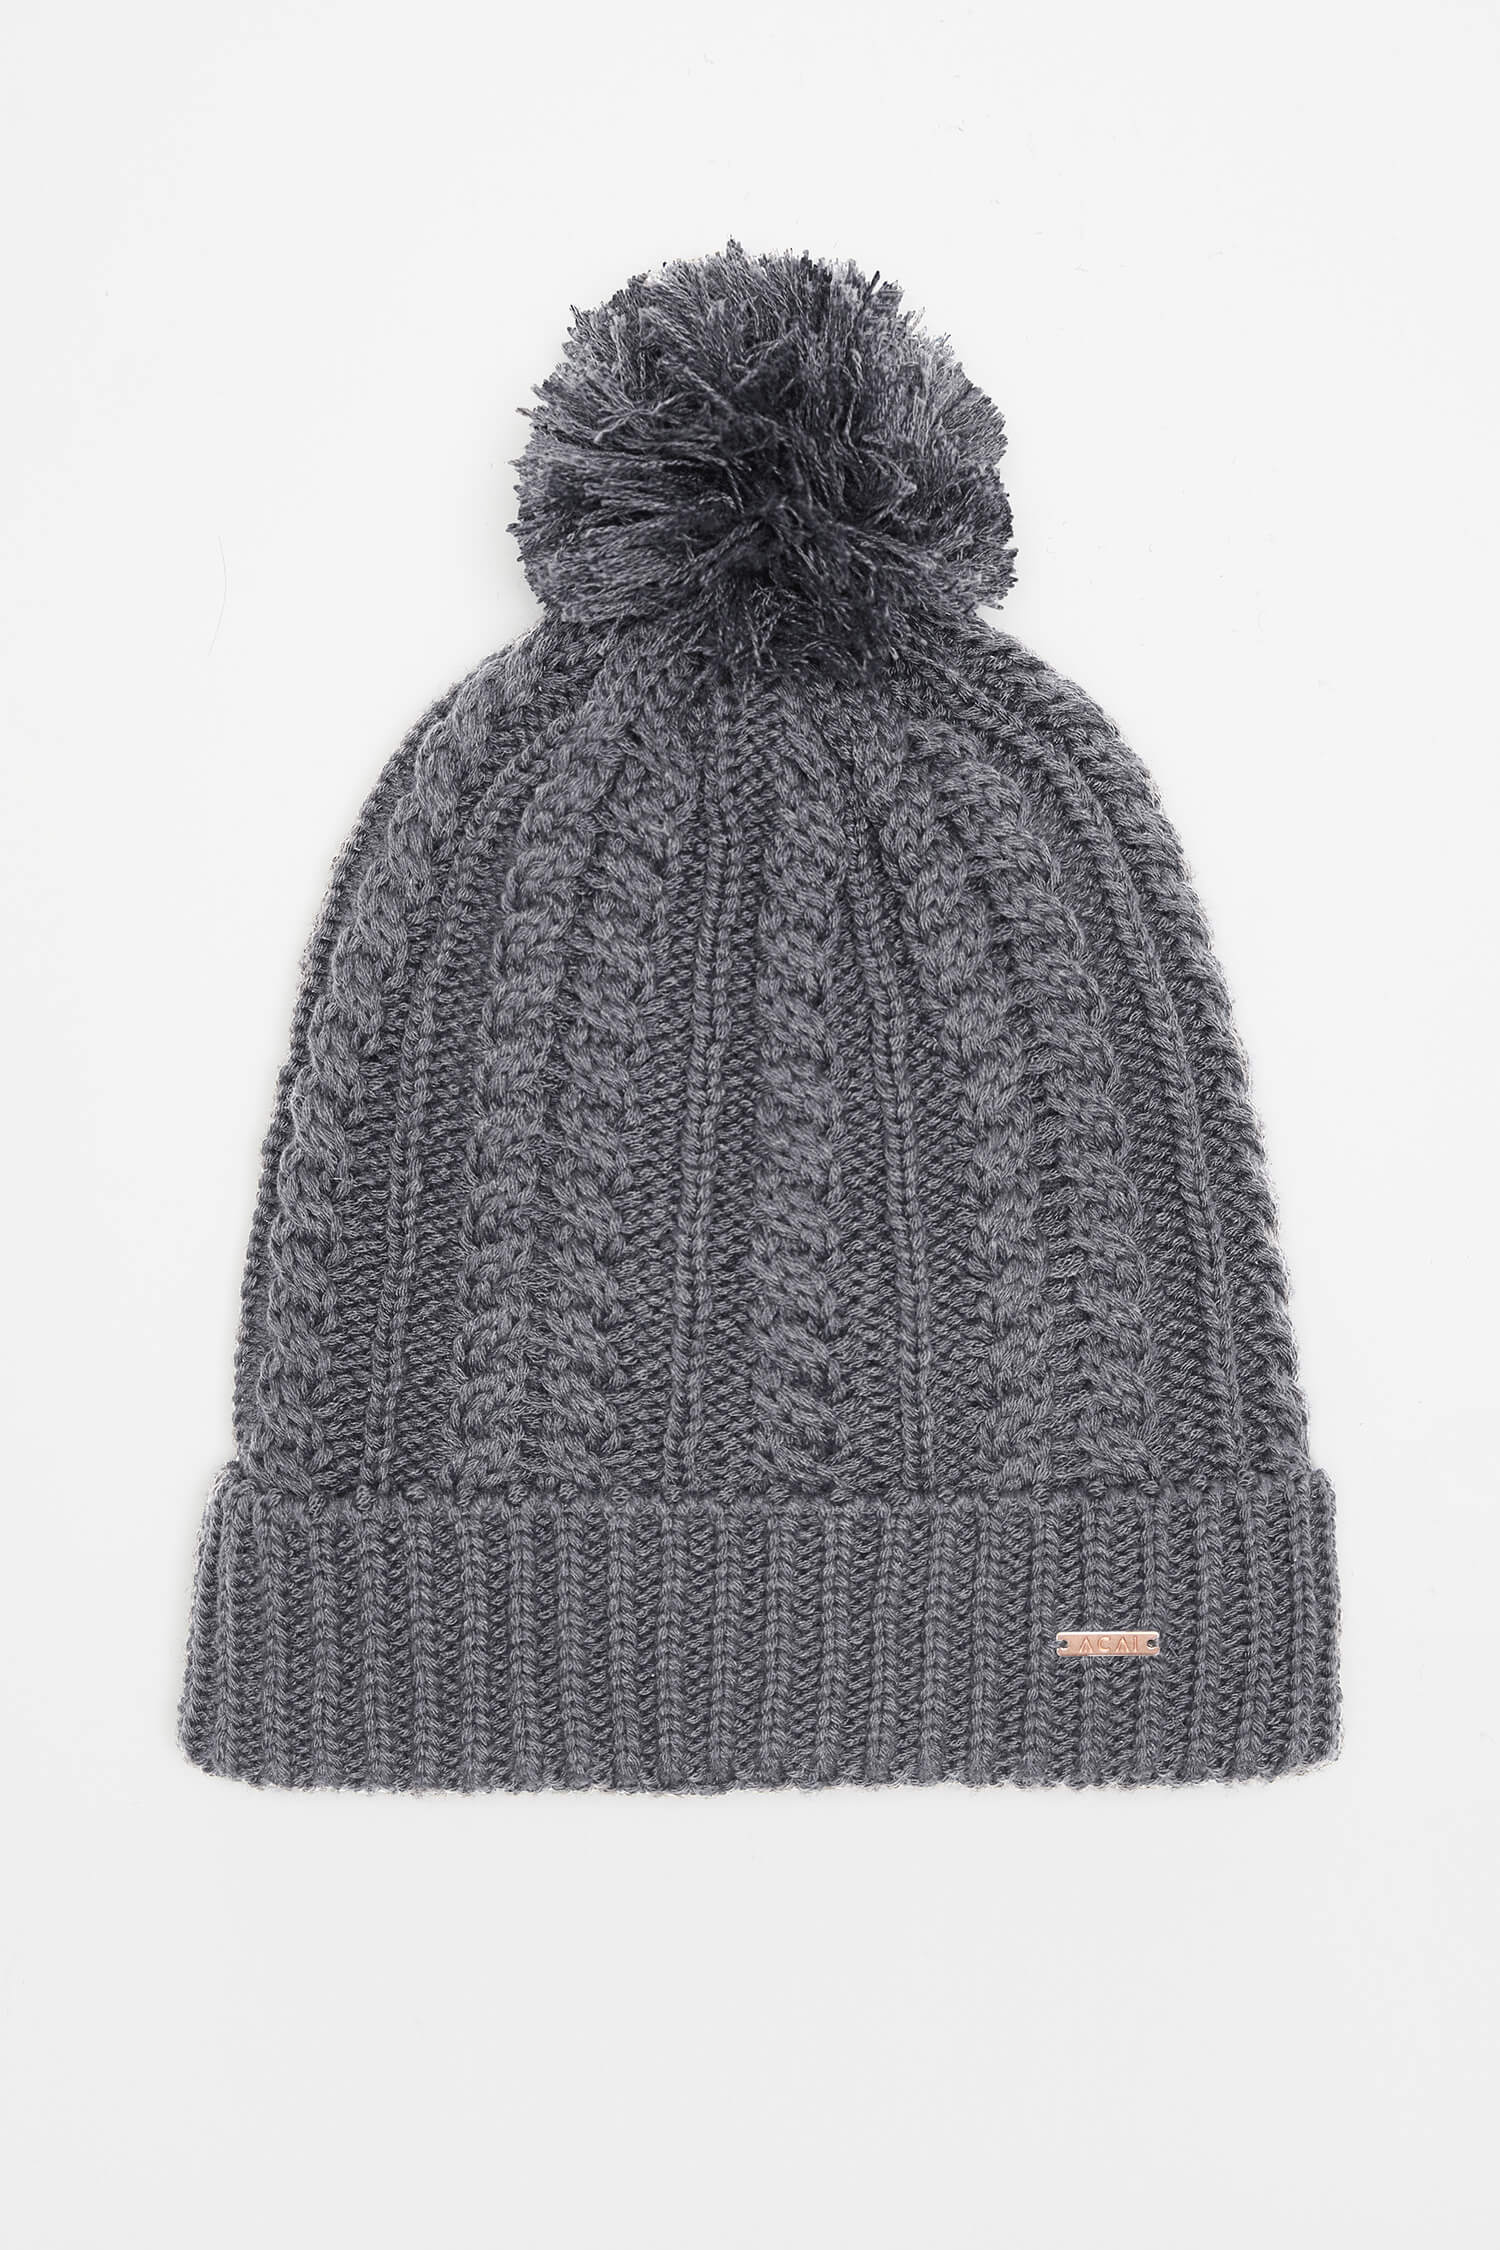 Chunky Knit Bobble Hat - Charcoal Accessories  